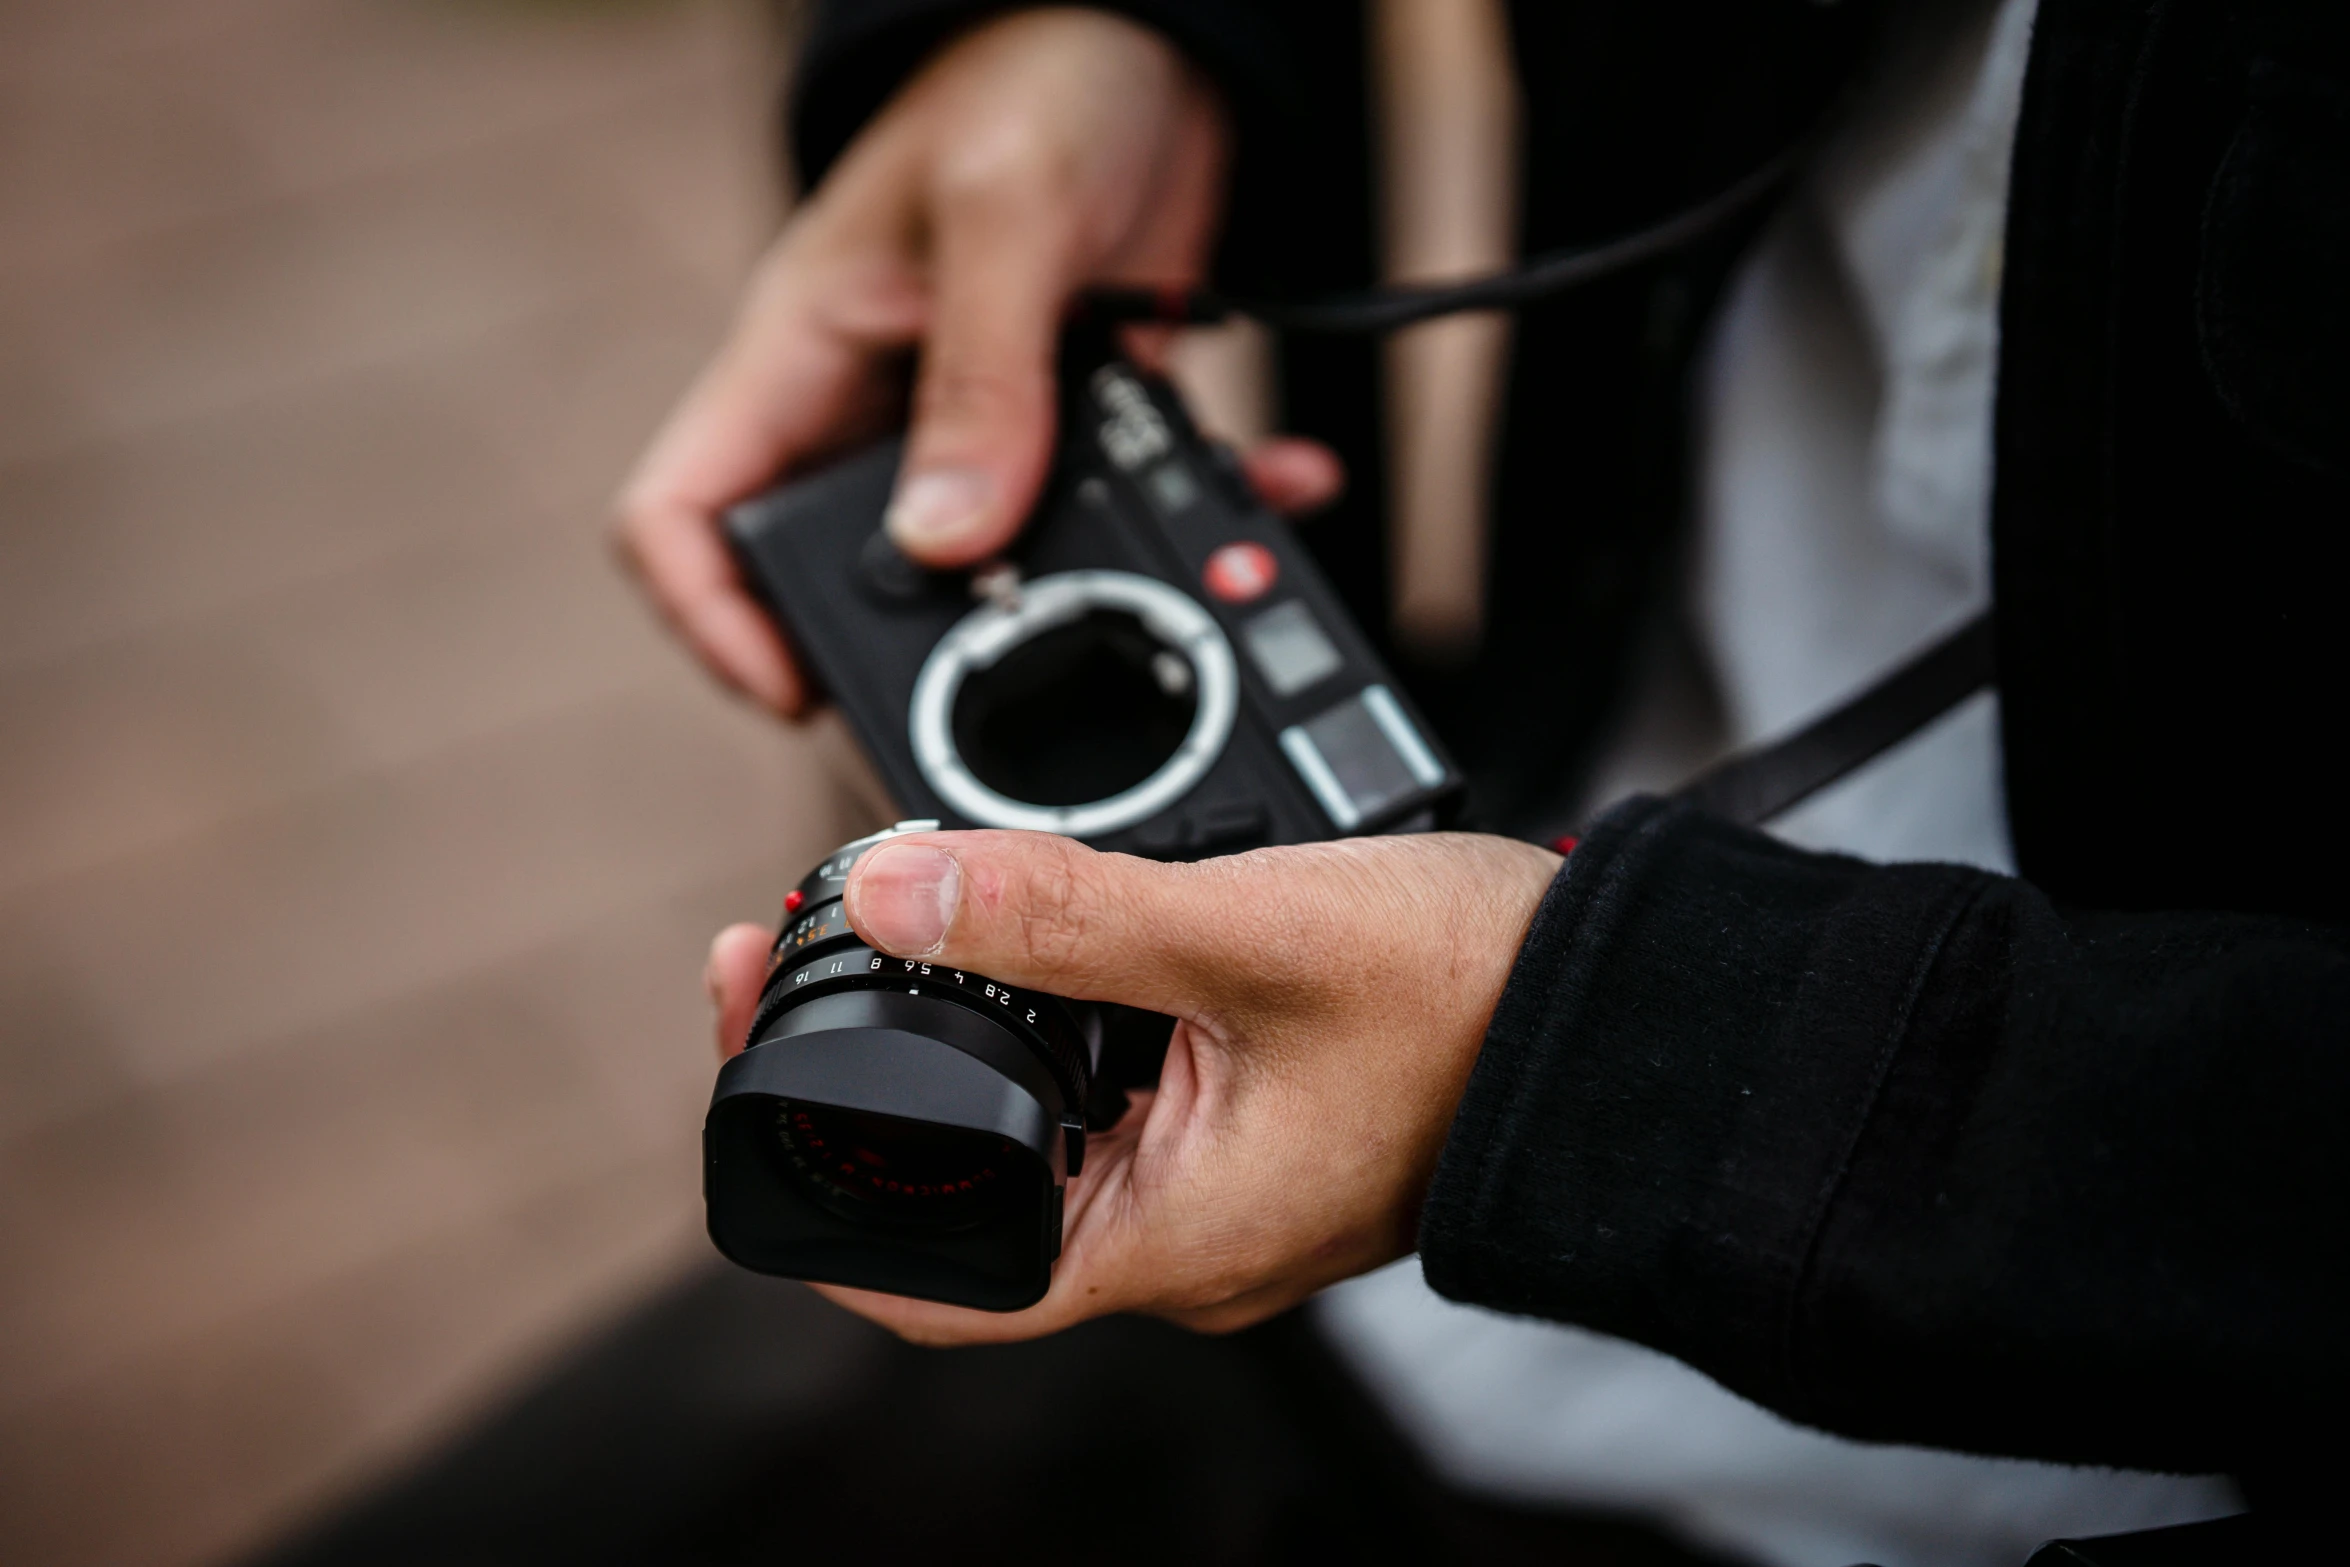 a person holding up a camera near a person's hands